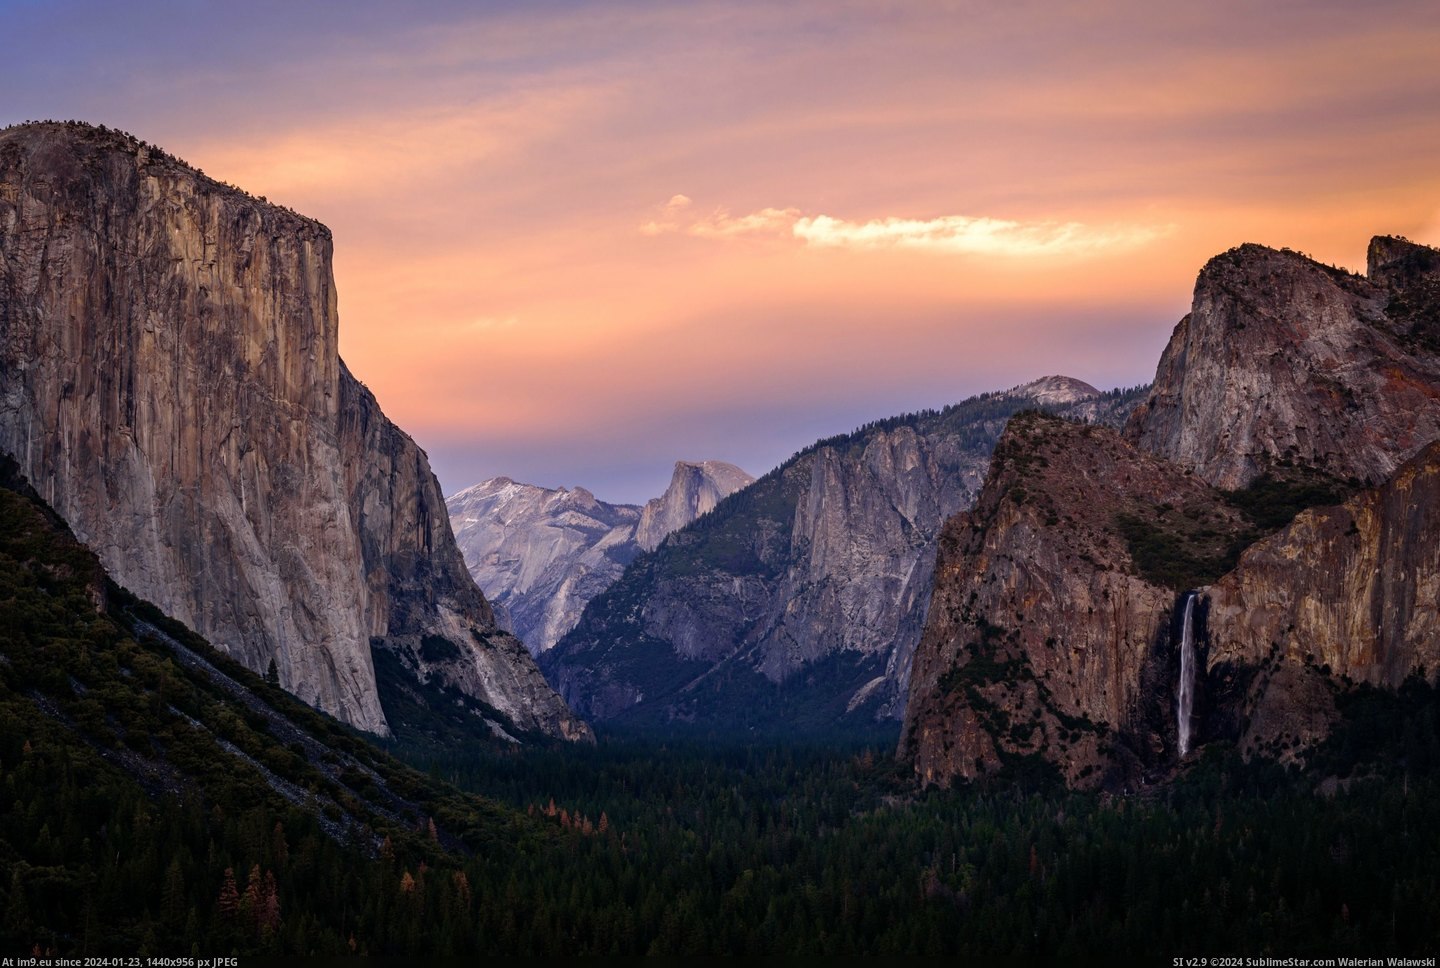 #Park #National #Usa #Yosemite #Tunnel #California #Exposed [Earthporn] The Tunnel View at Yosemite National Park, California, USA [5295x3535] Pic. (Image of album My r/EARTHPORN favs))